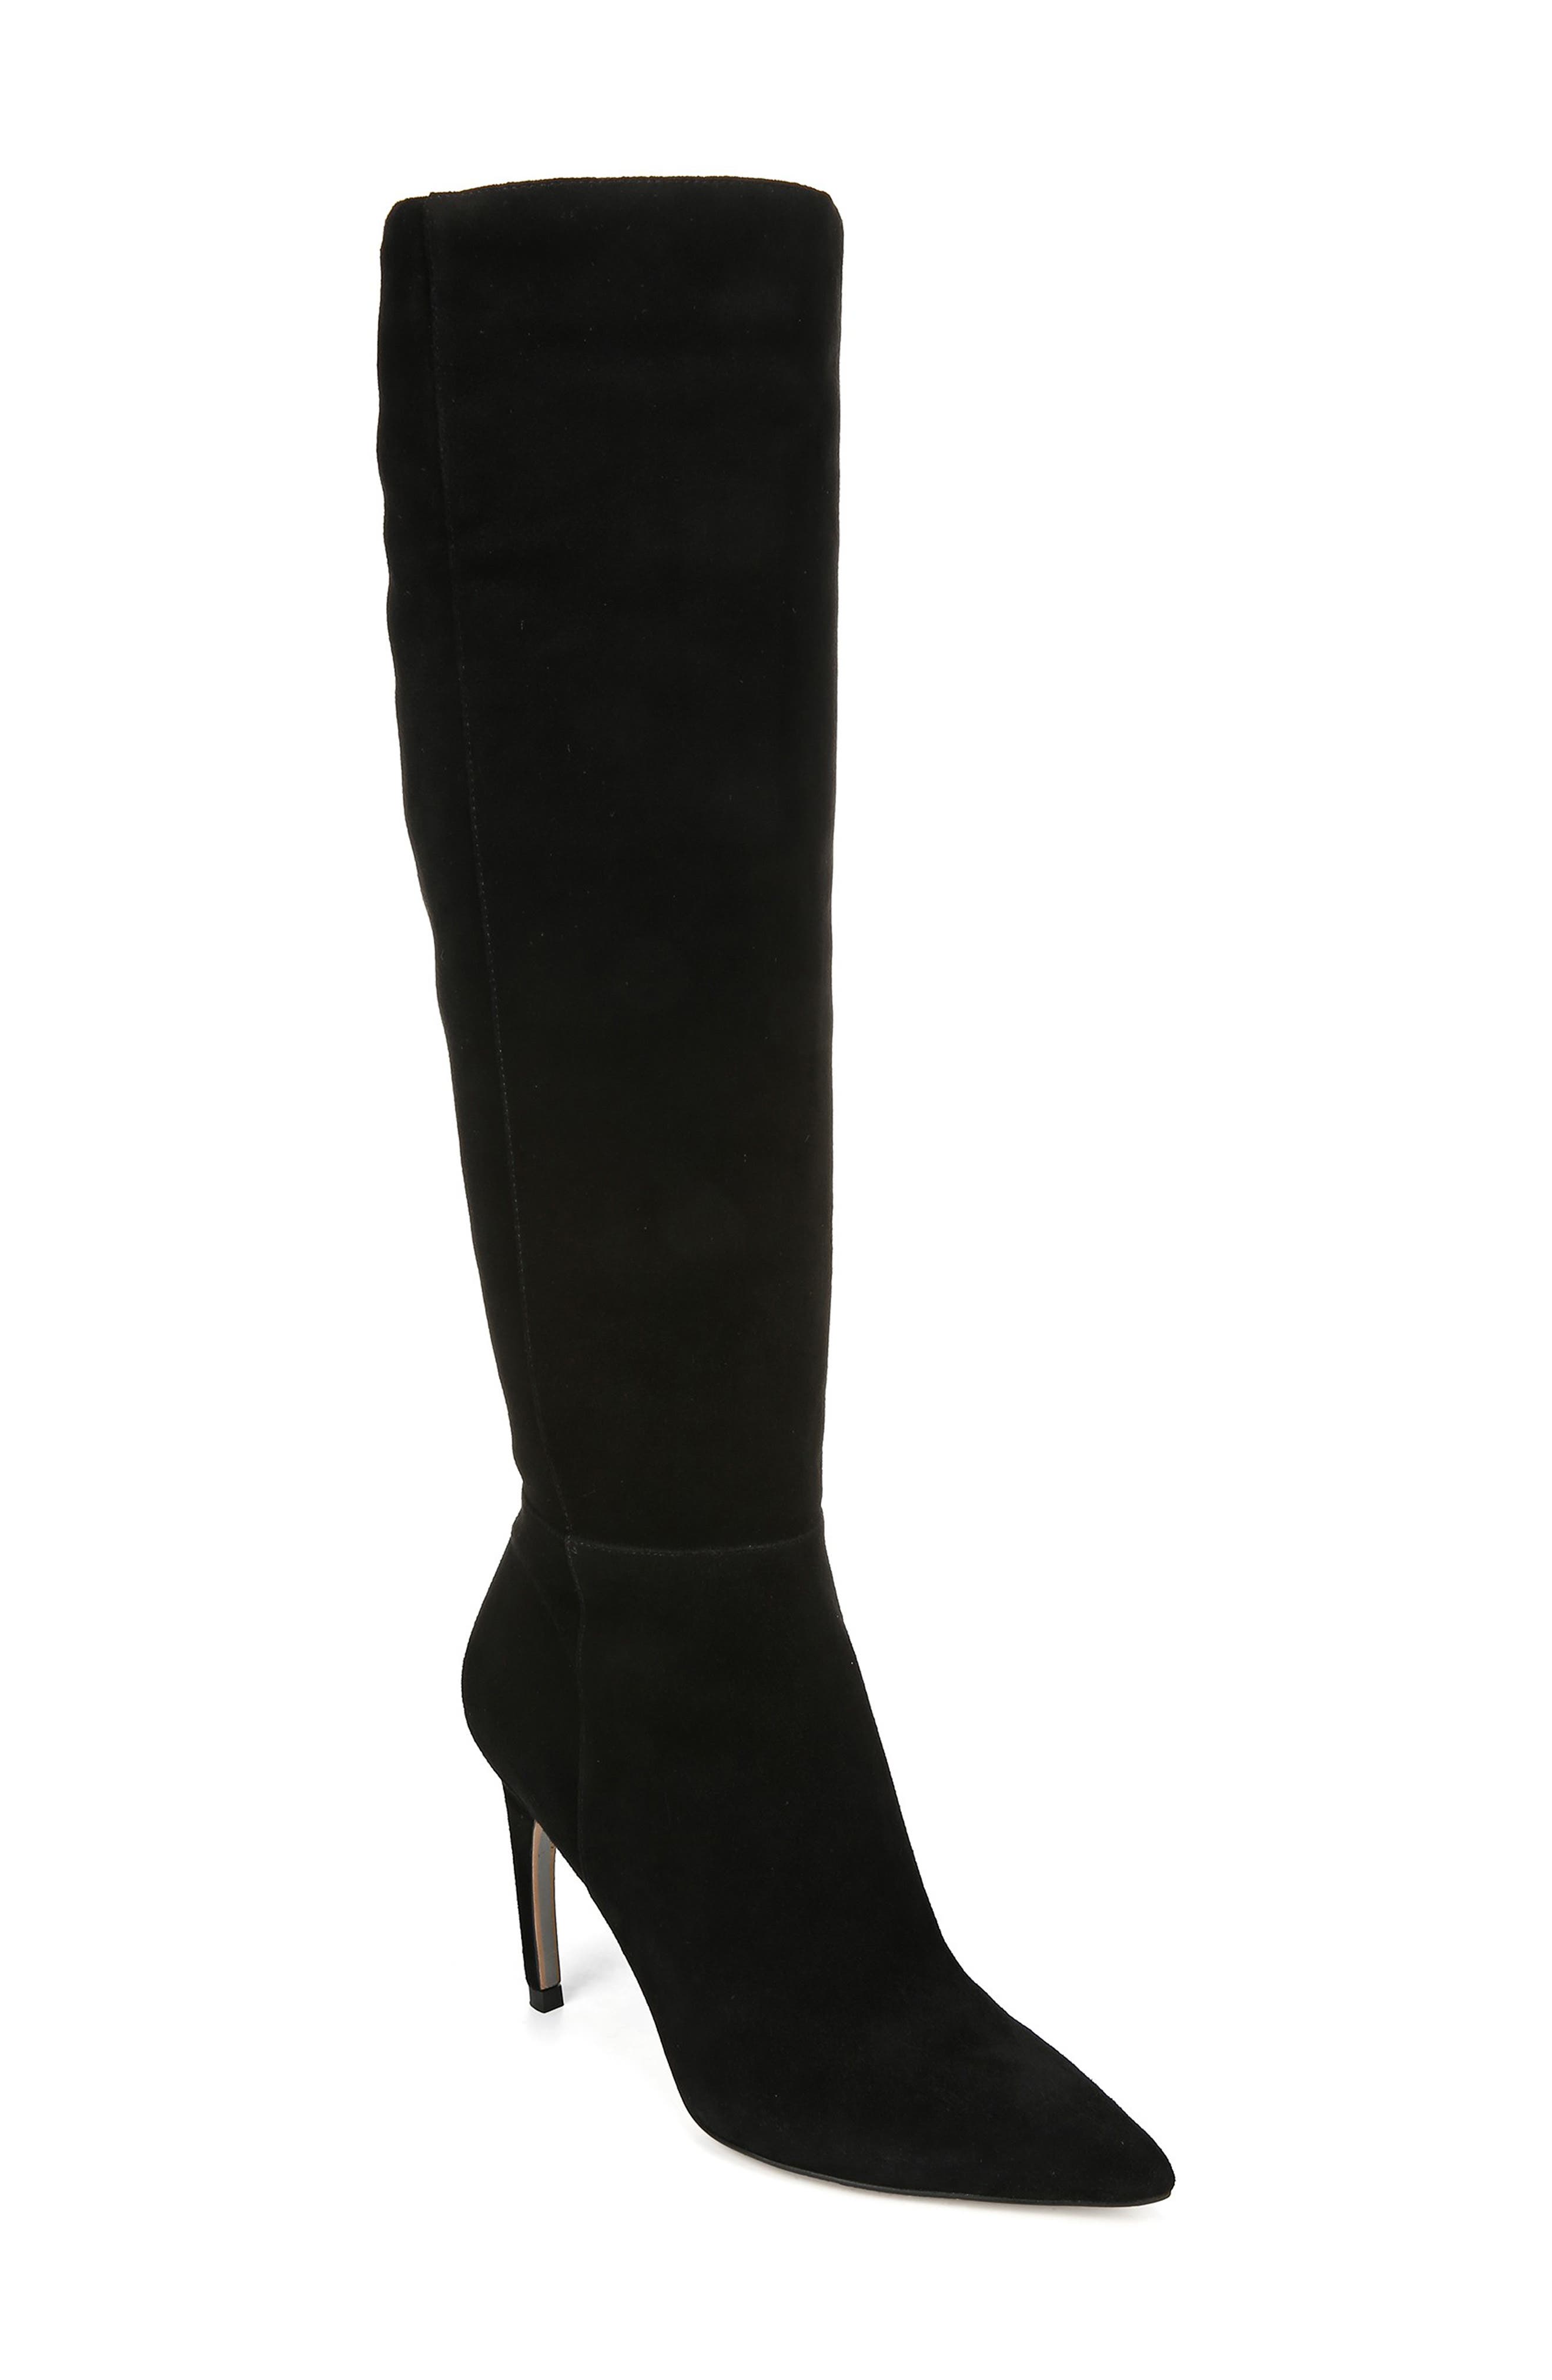 black suede knee high boots